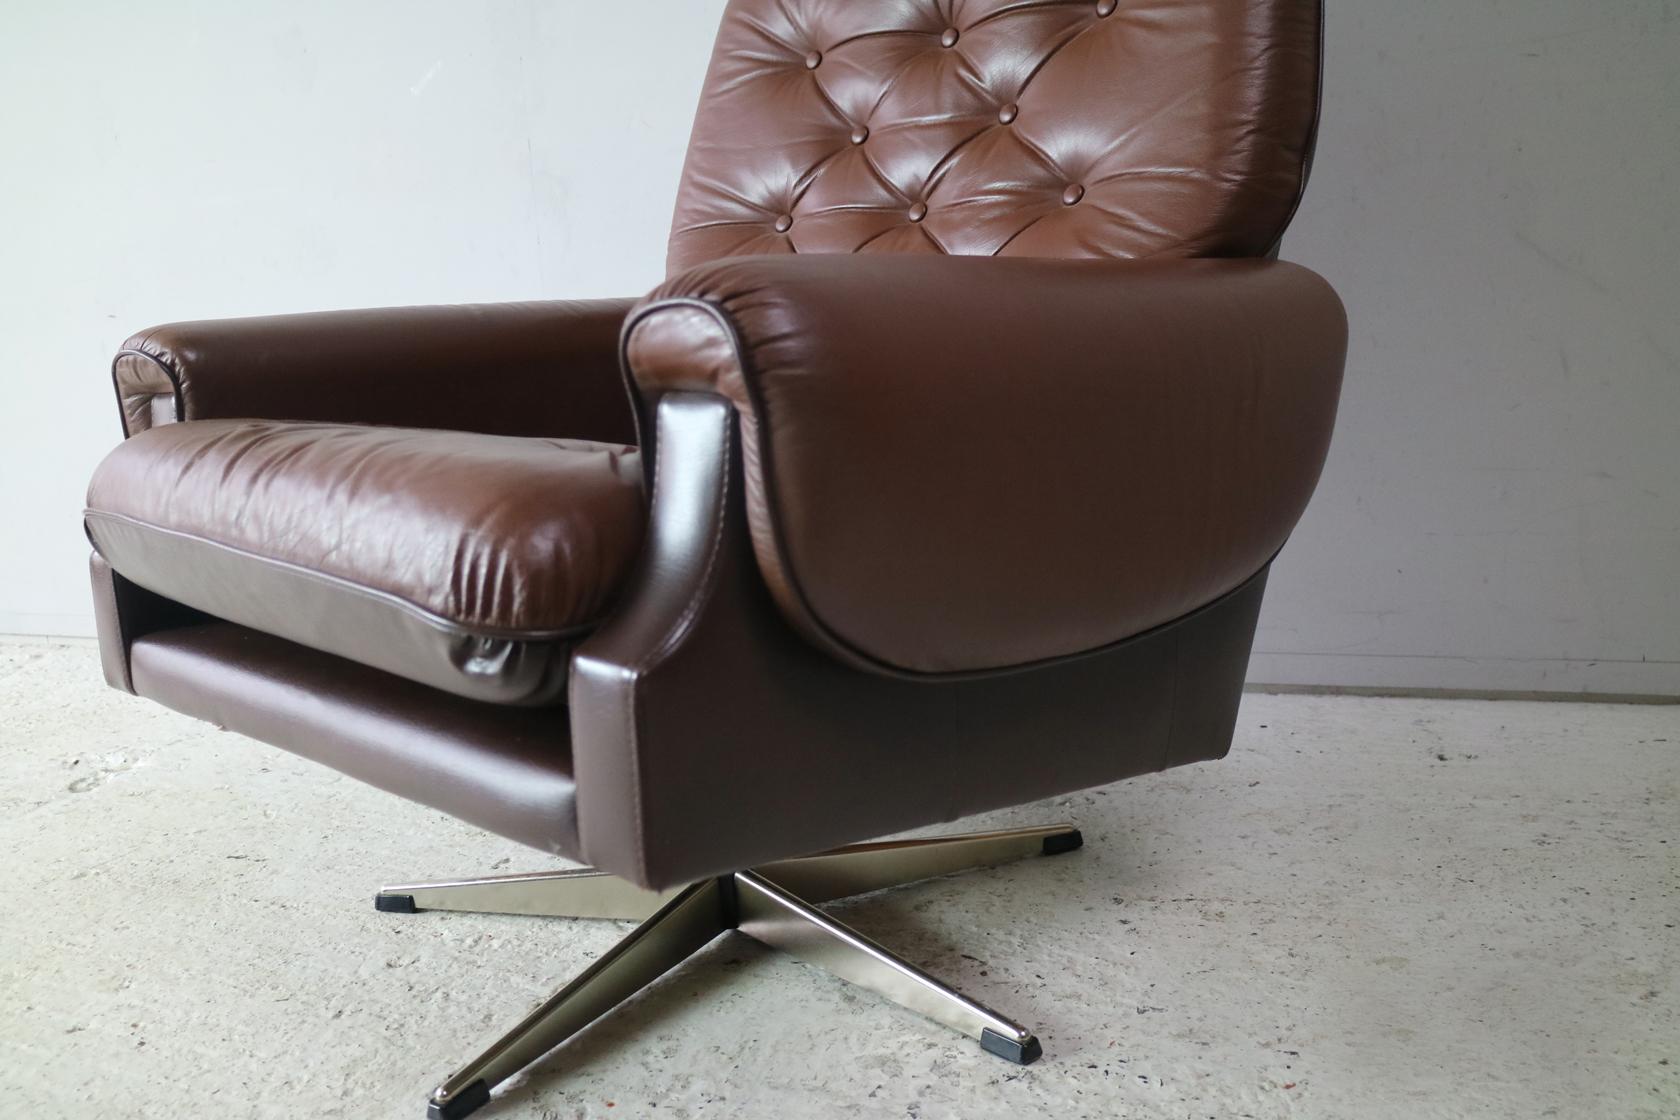 A very distinctive Danish brown leather swivel armchair / lounge chair. With the original leather upholstery consisting of two different brown shades, one for the upper seating and one for the lower part of the cushion and frame.

Lovely wrap over